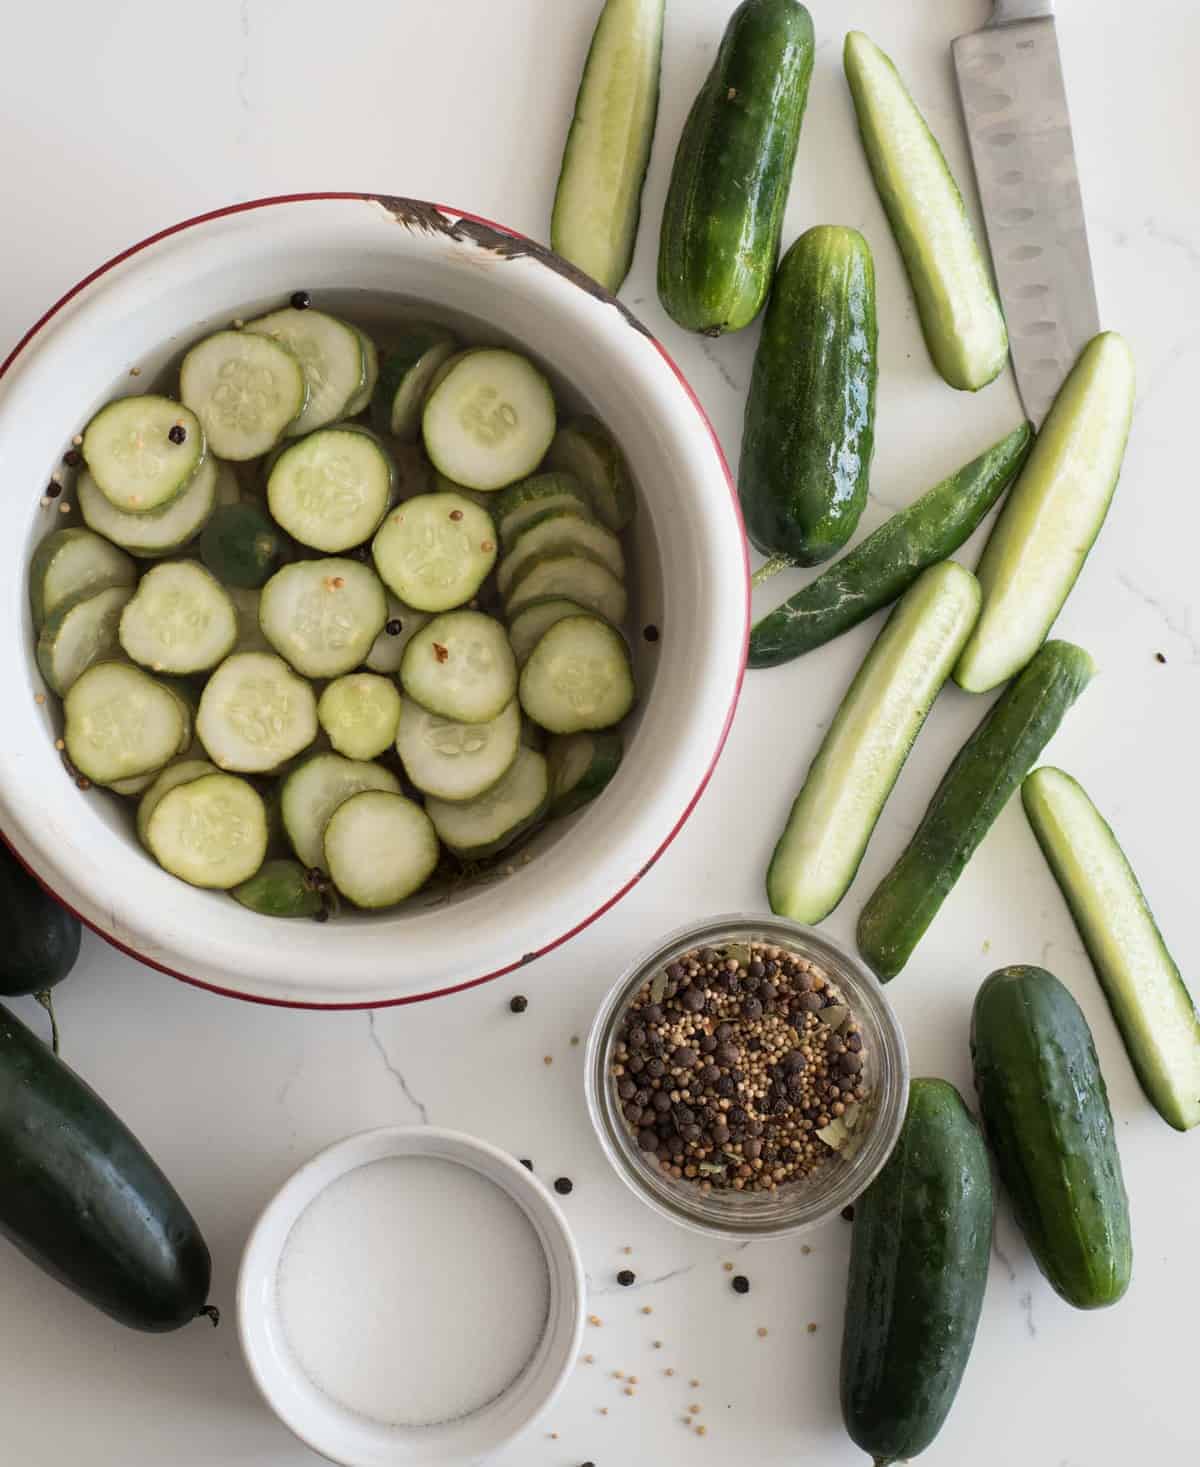 A simple homemade pickling spice recipe to make refrigerator pickles, overnight pickles, canned pickles and more!